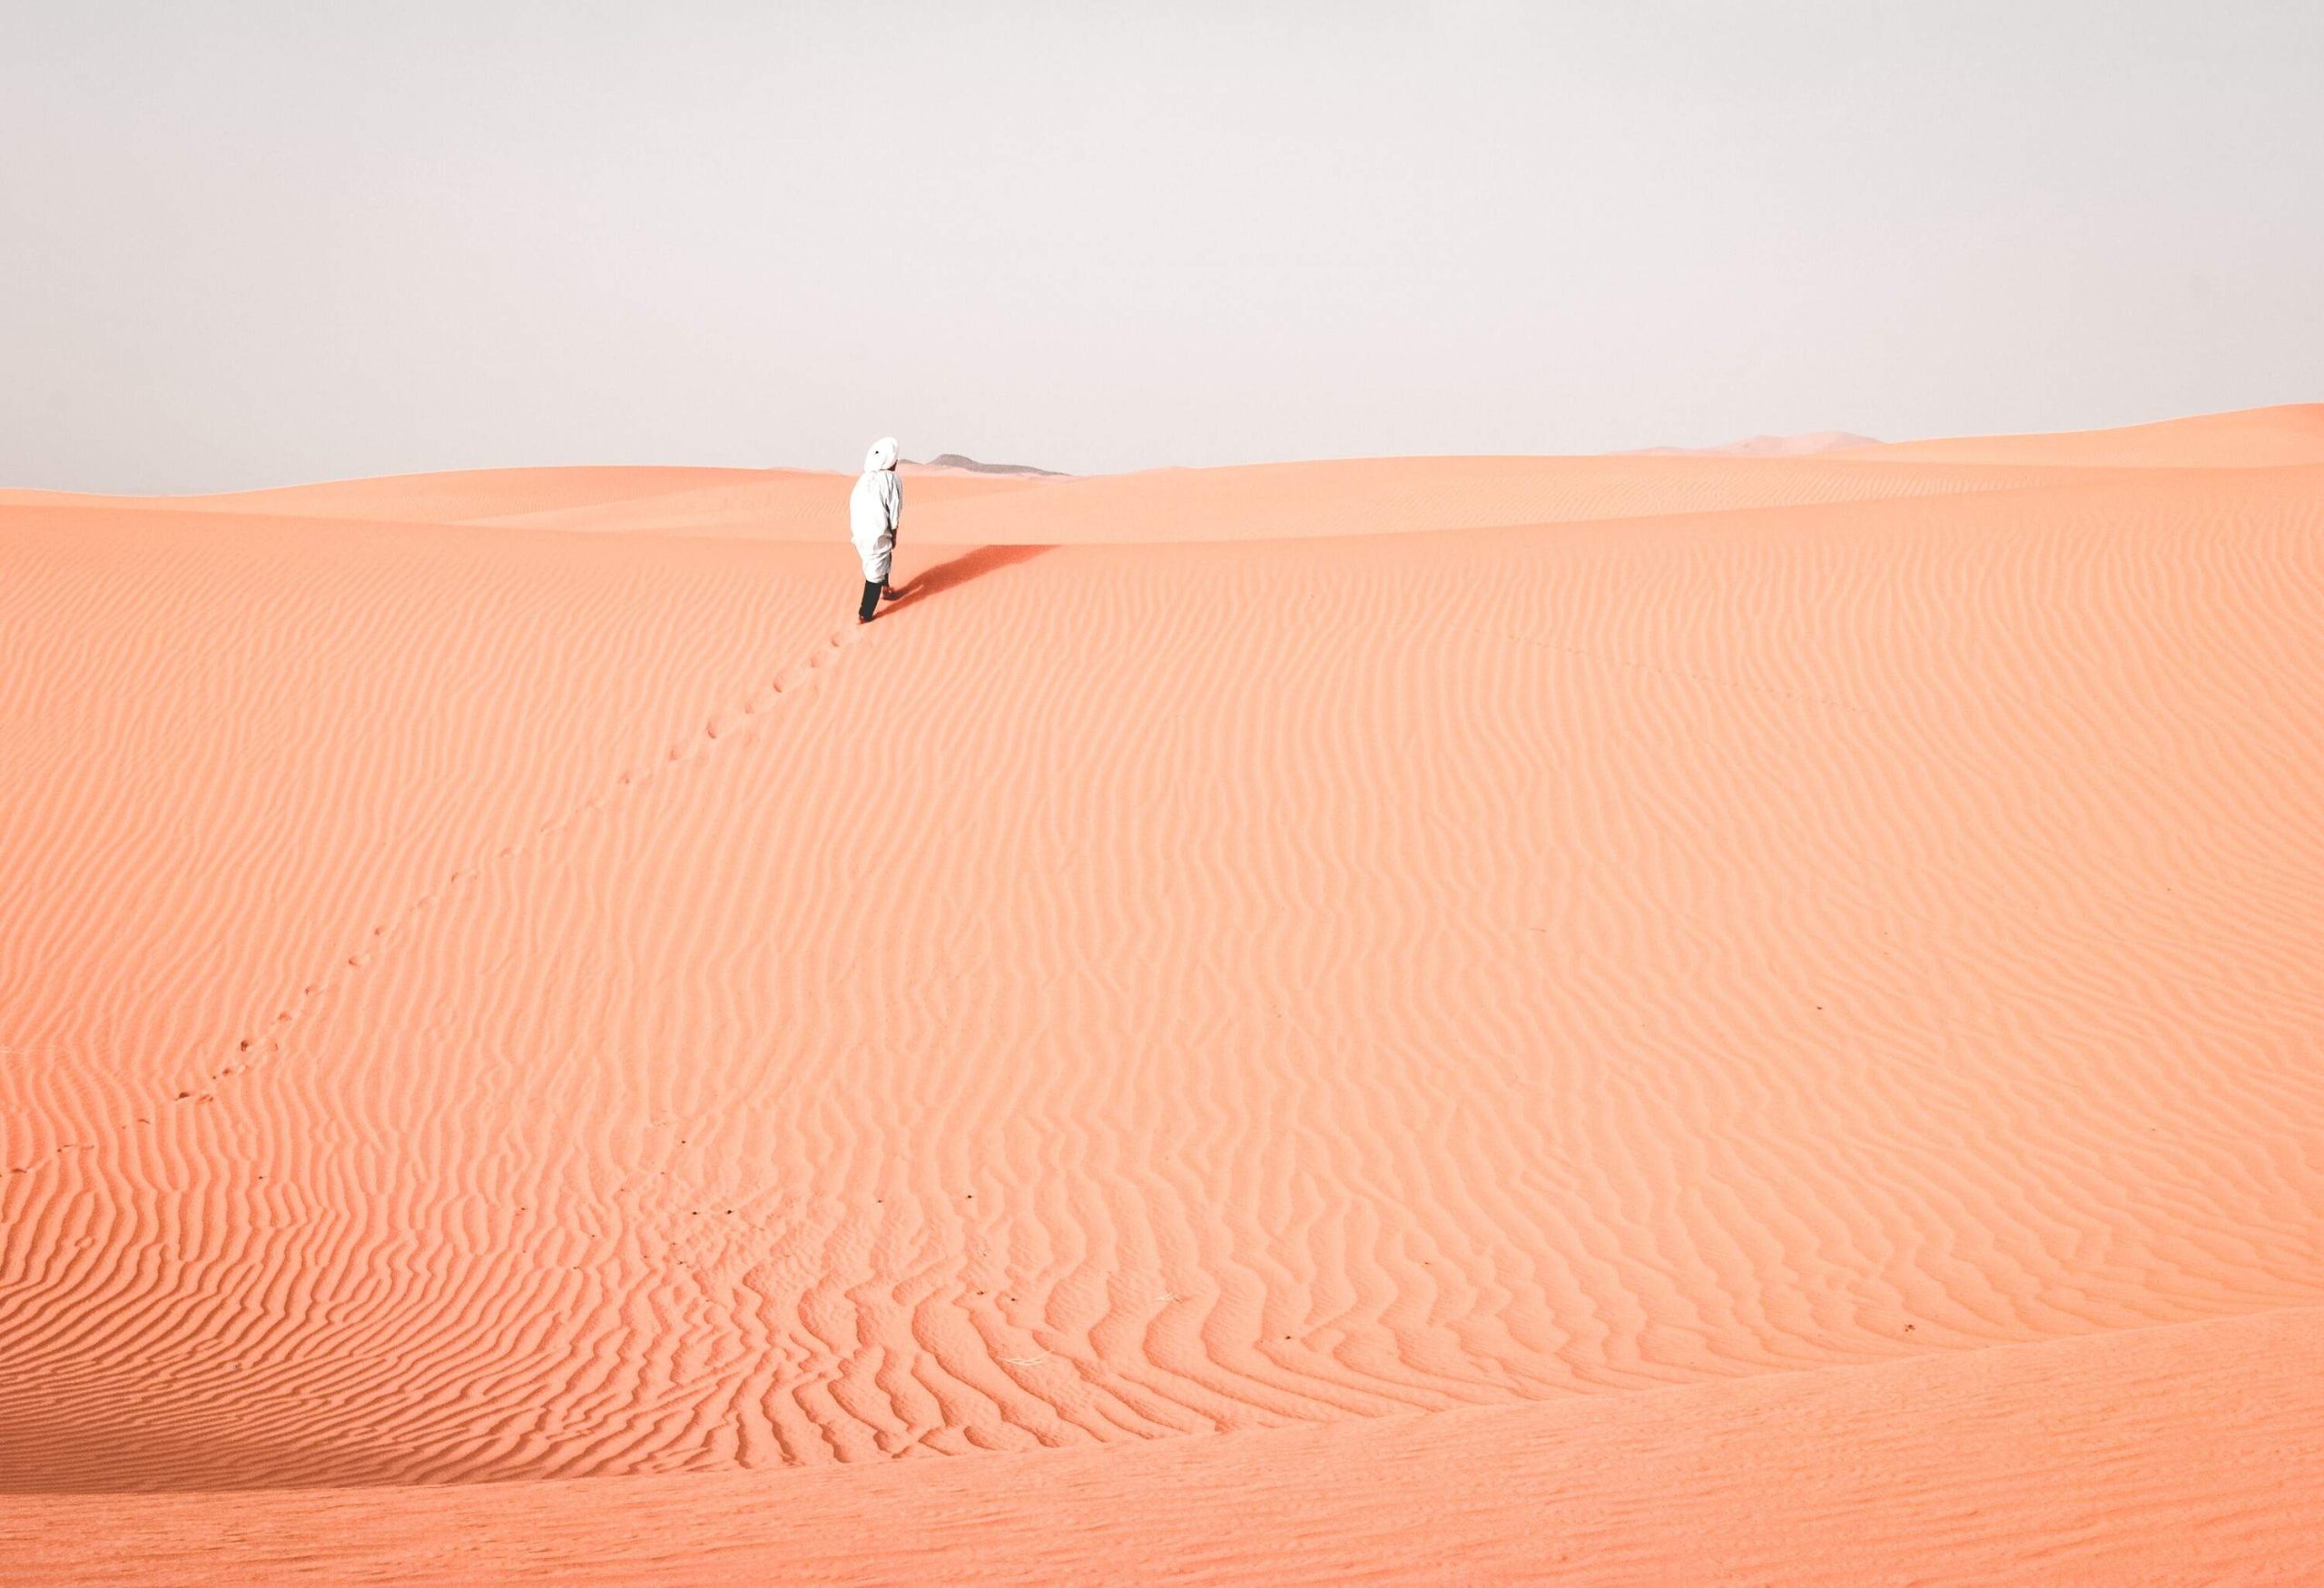 An individual in a traditional white dress on a desert.